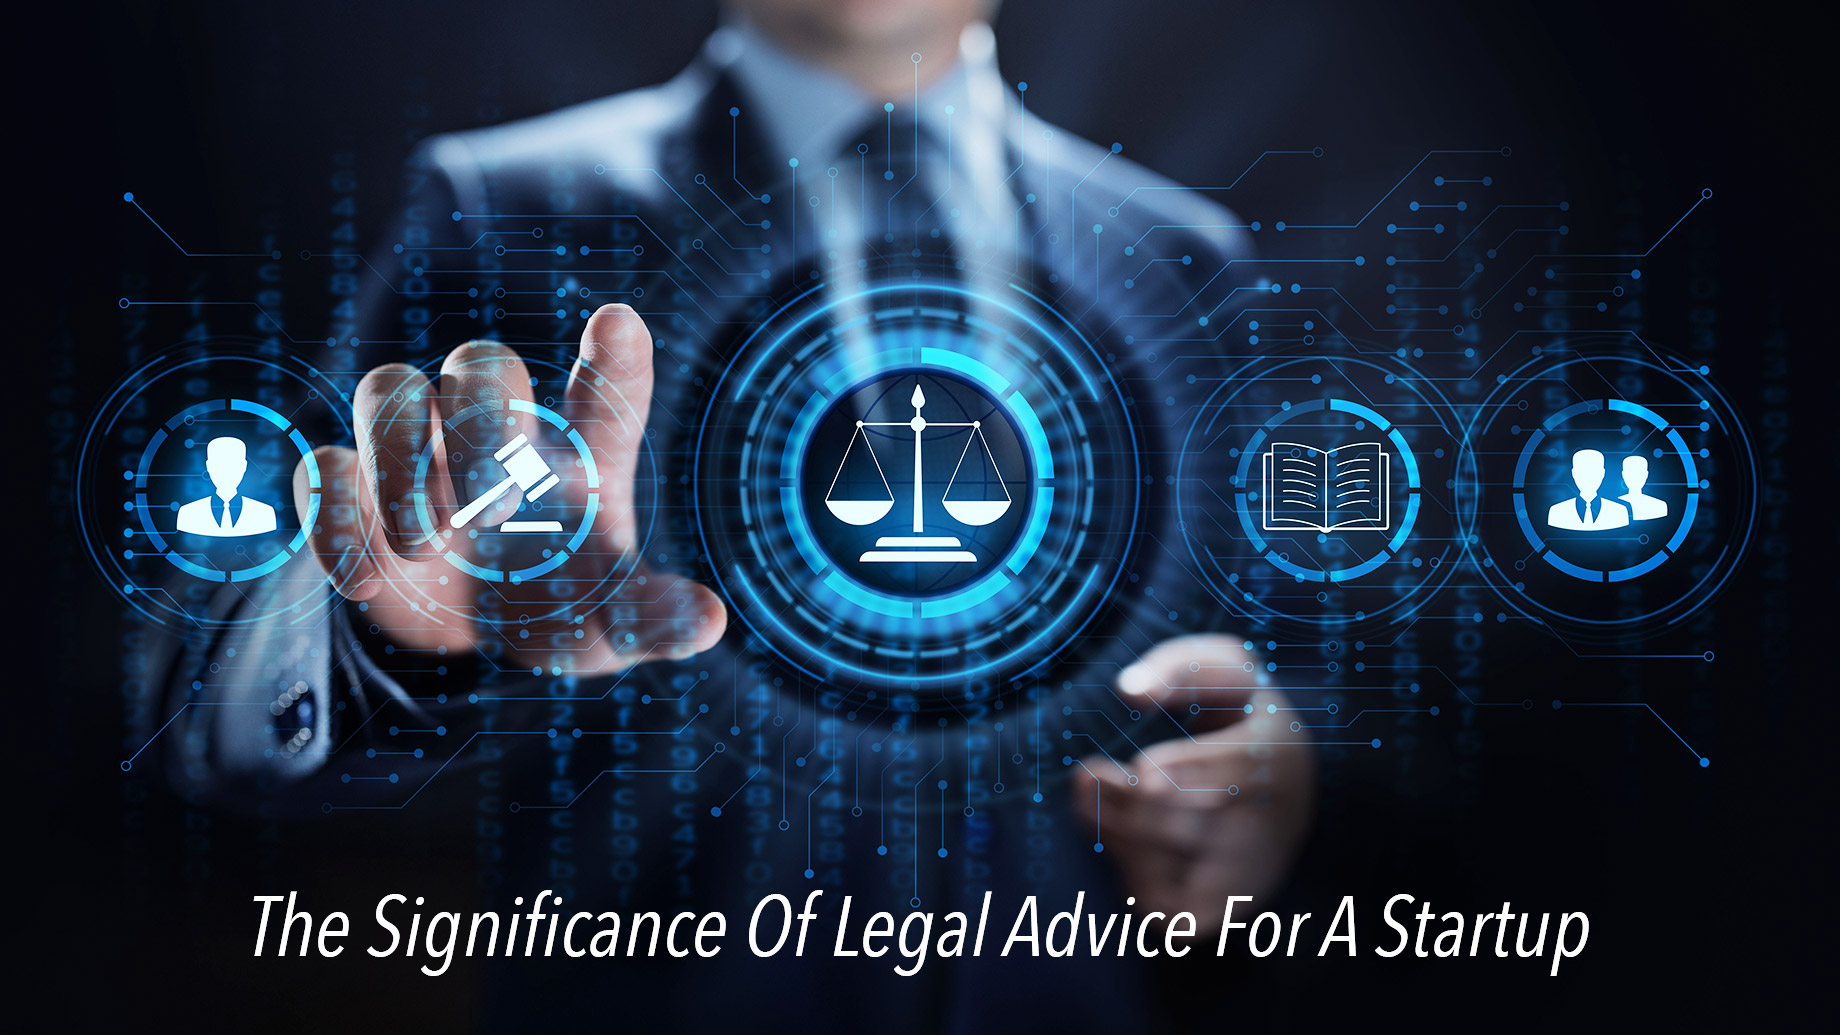 The Significance Of Legal Advice For A Startup